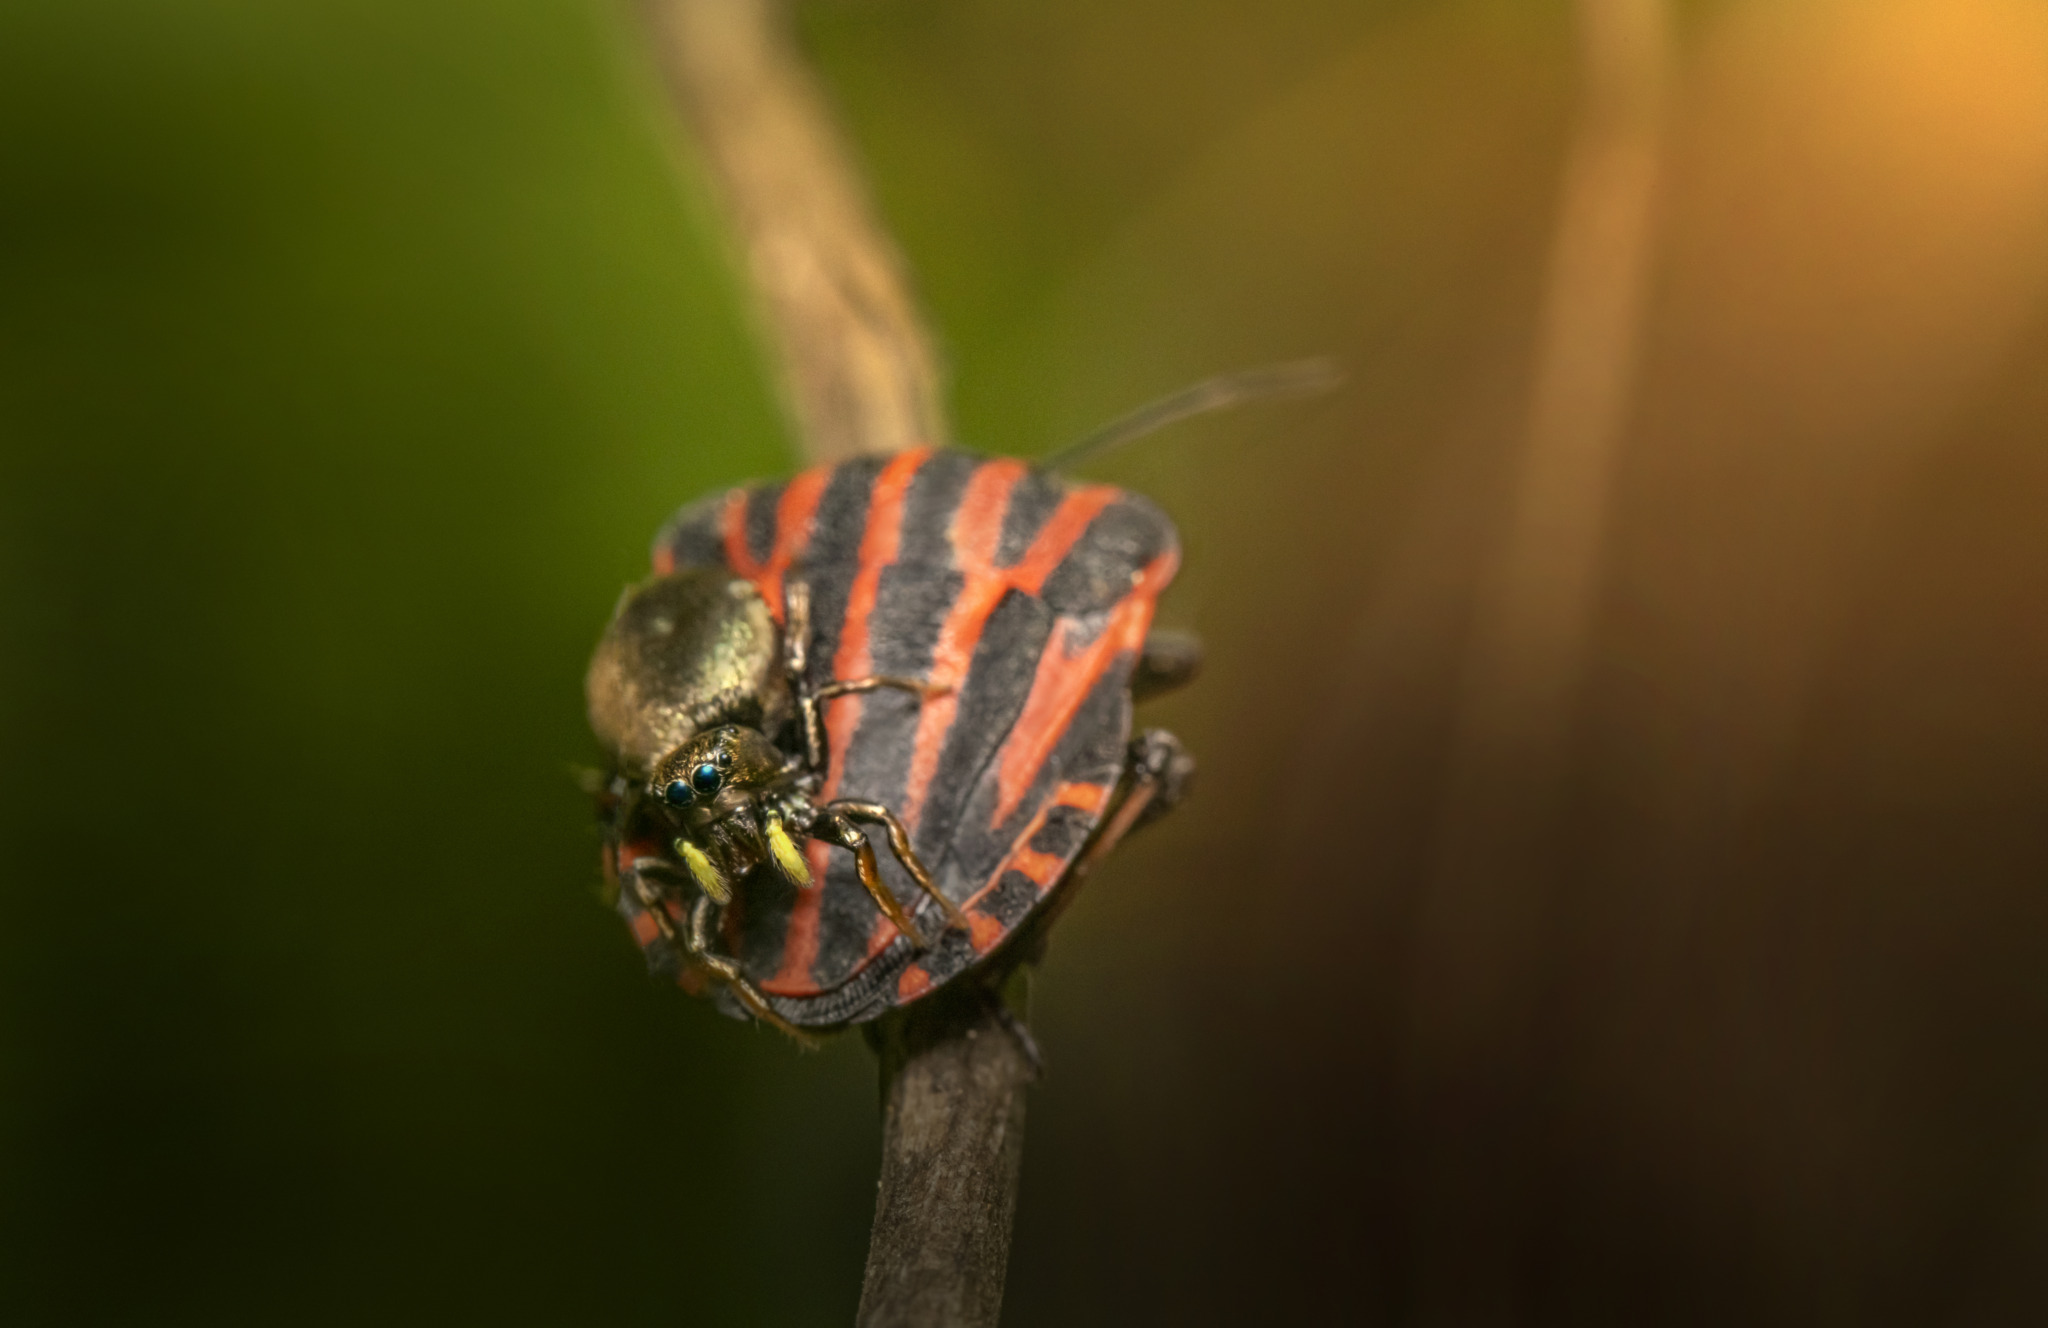 Shield bug and jumping spider